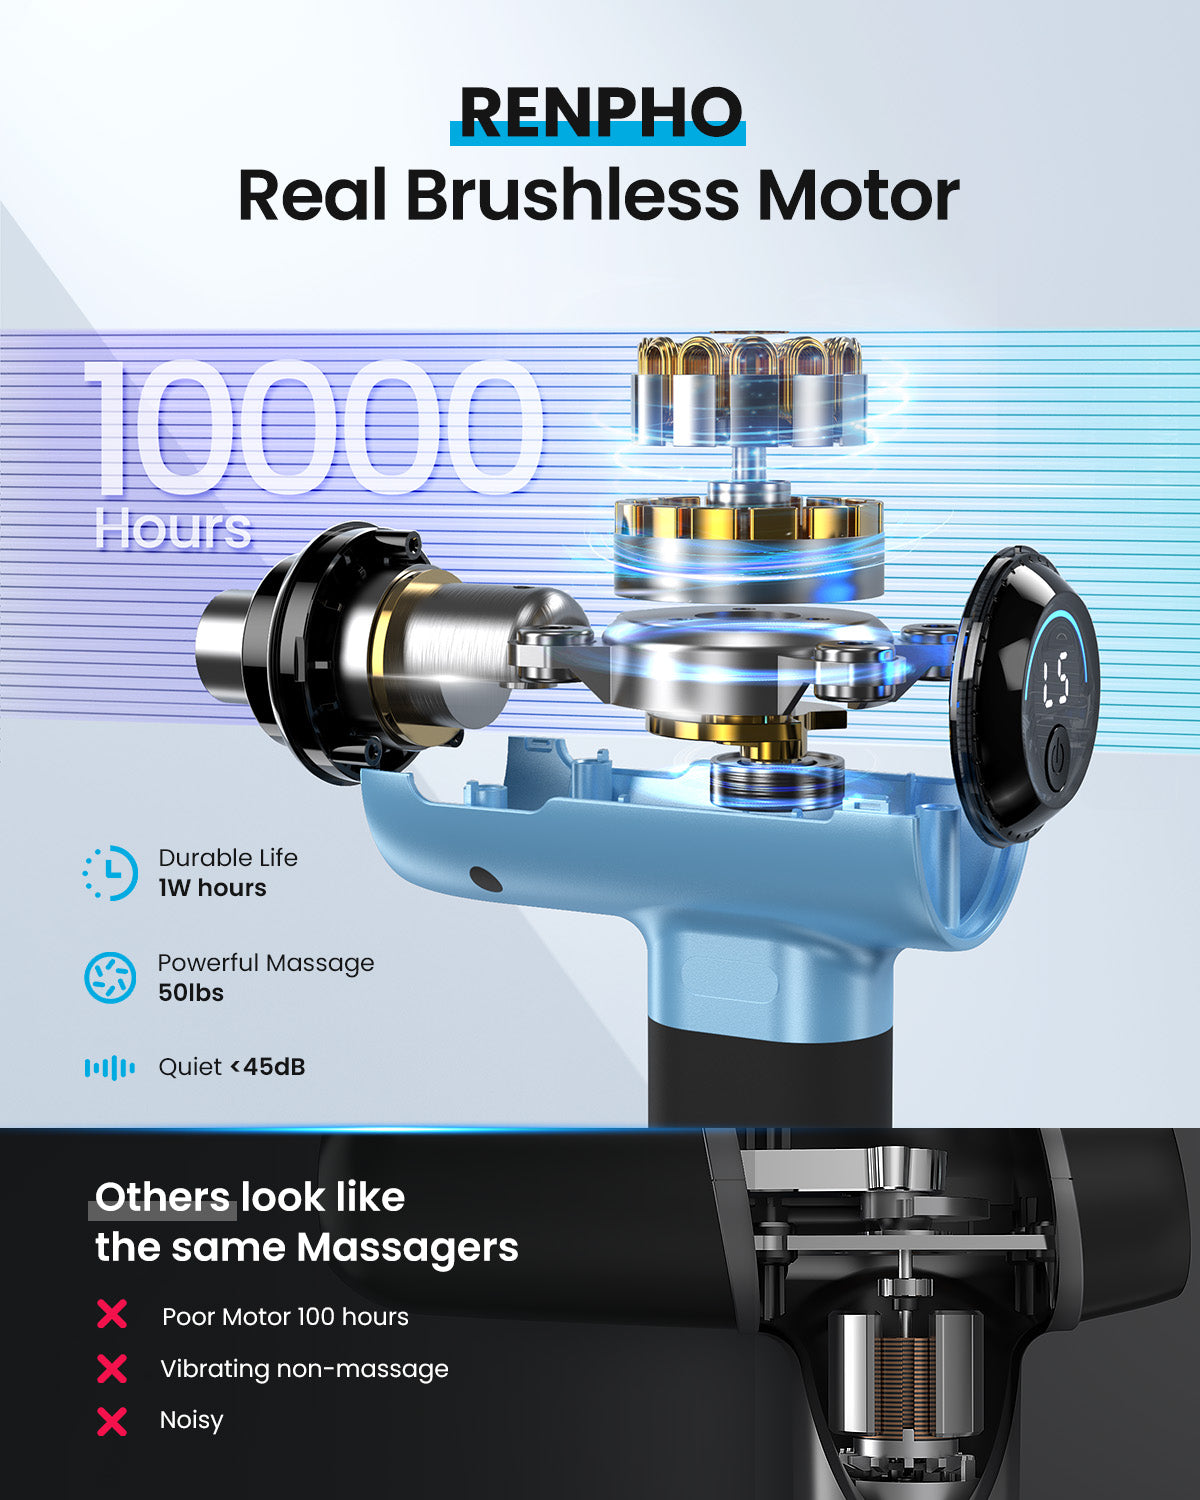 An advertisement for a Renpho EU Massage Gun with a brushless motor, highlighting its health benefits. The image shows a detailed, exploded view of the motor components and compares the product favorably with.